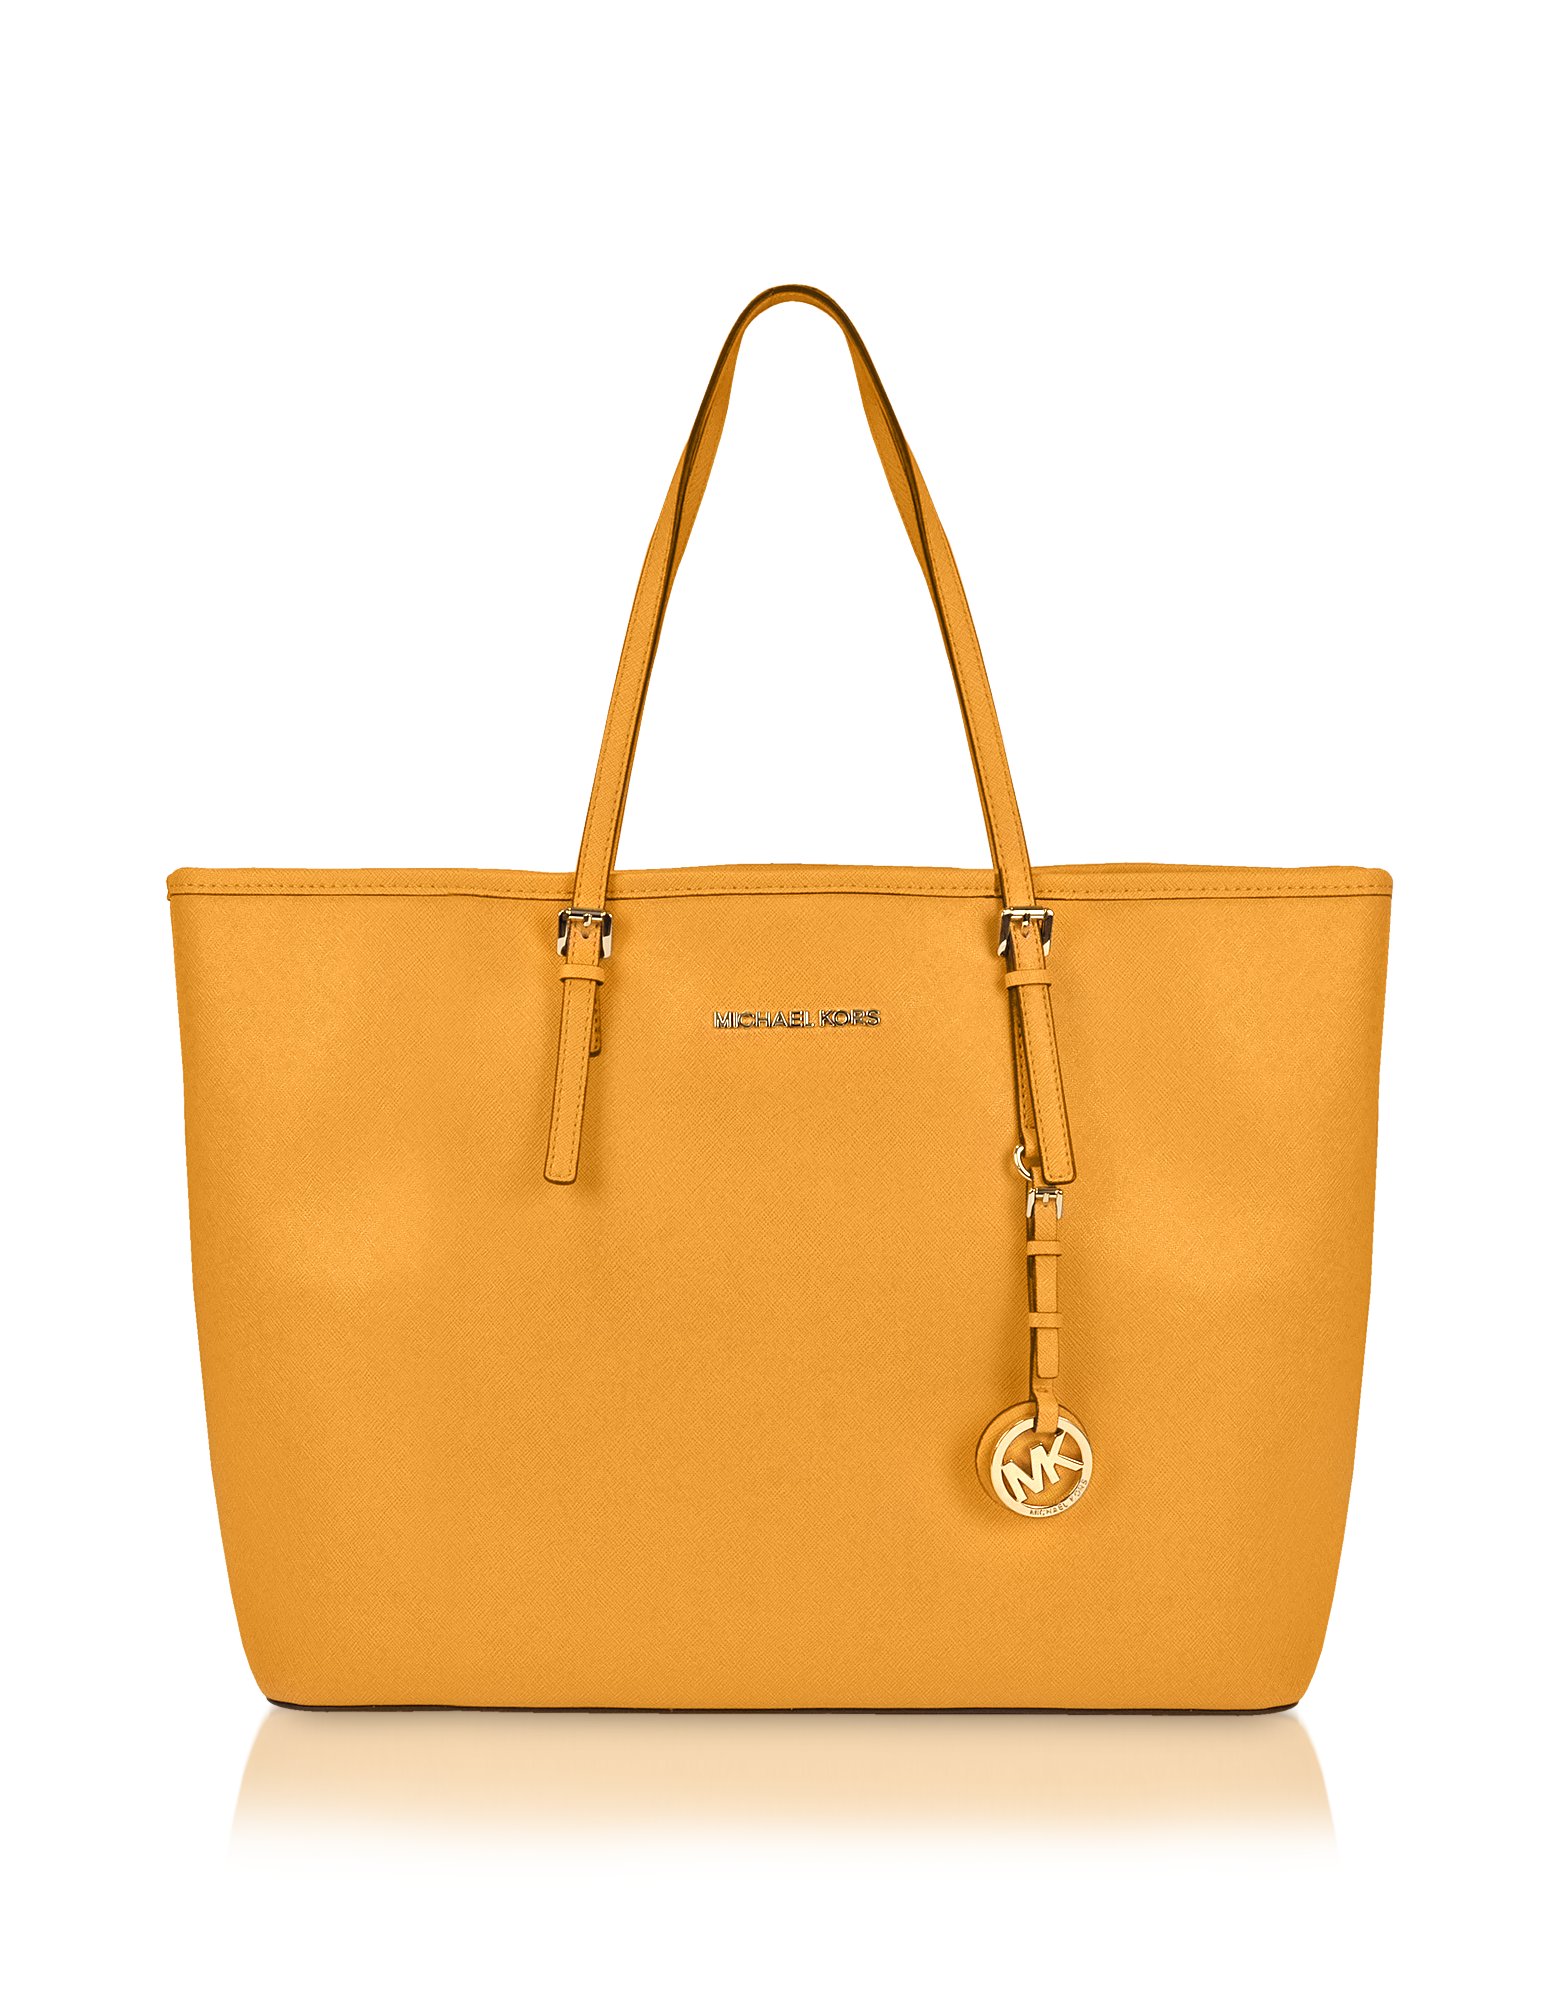 Lyst - Michael Kors Jet Set Travel Saffiano Leather Tote in Yellow